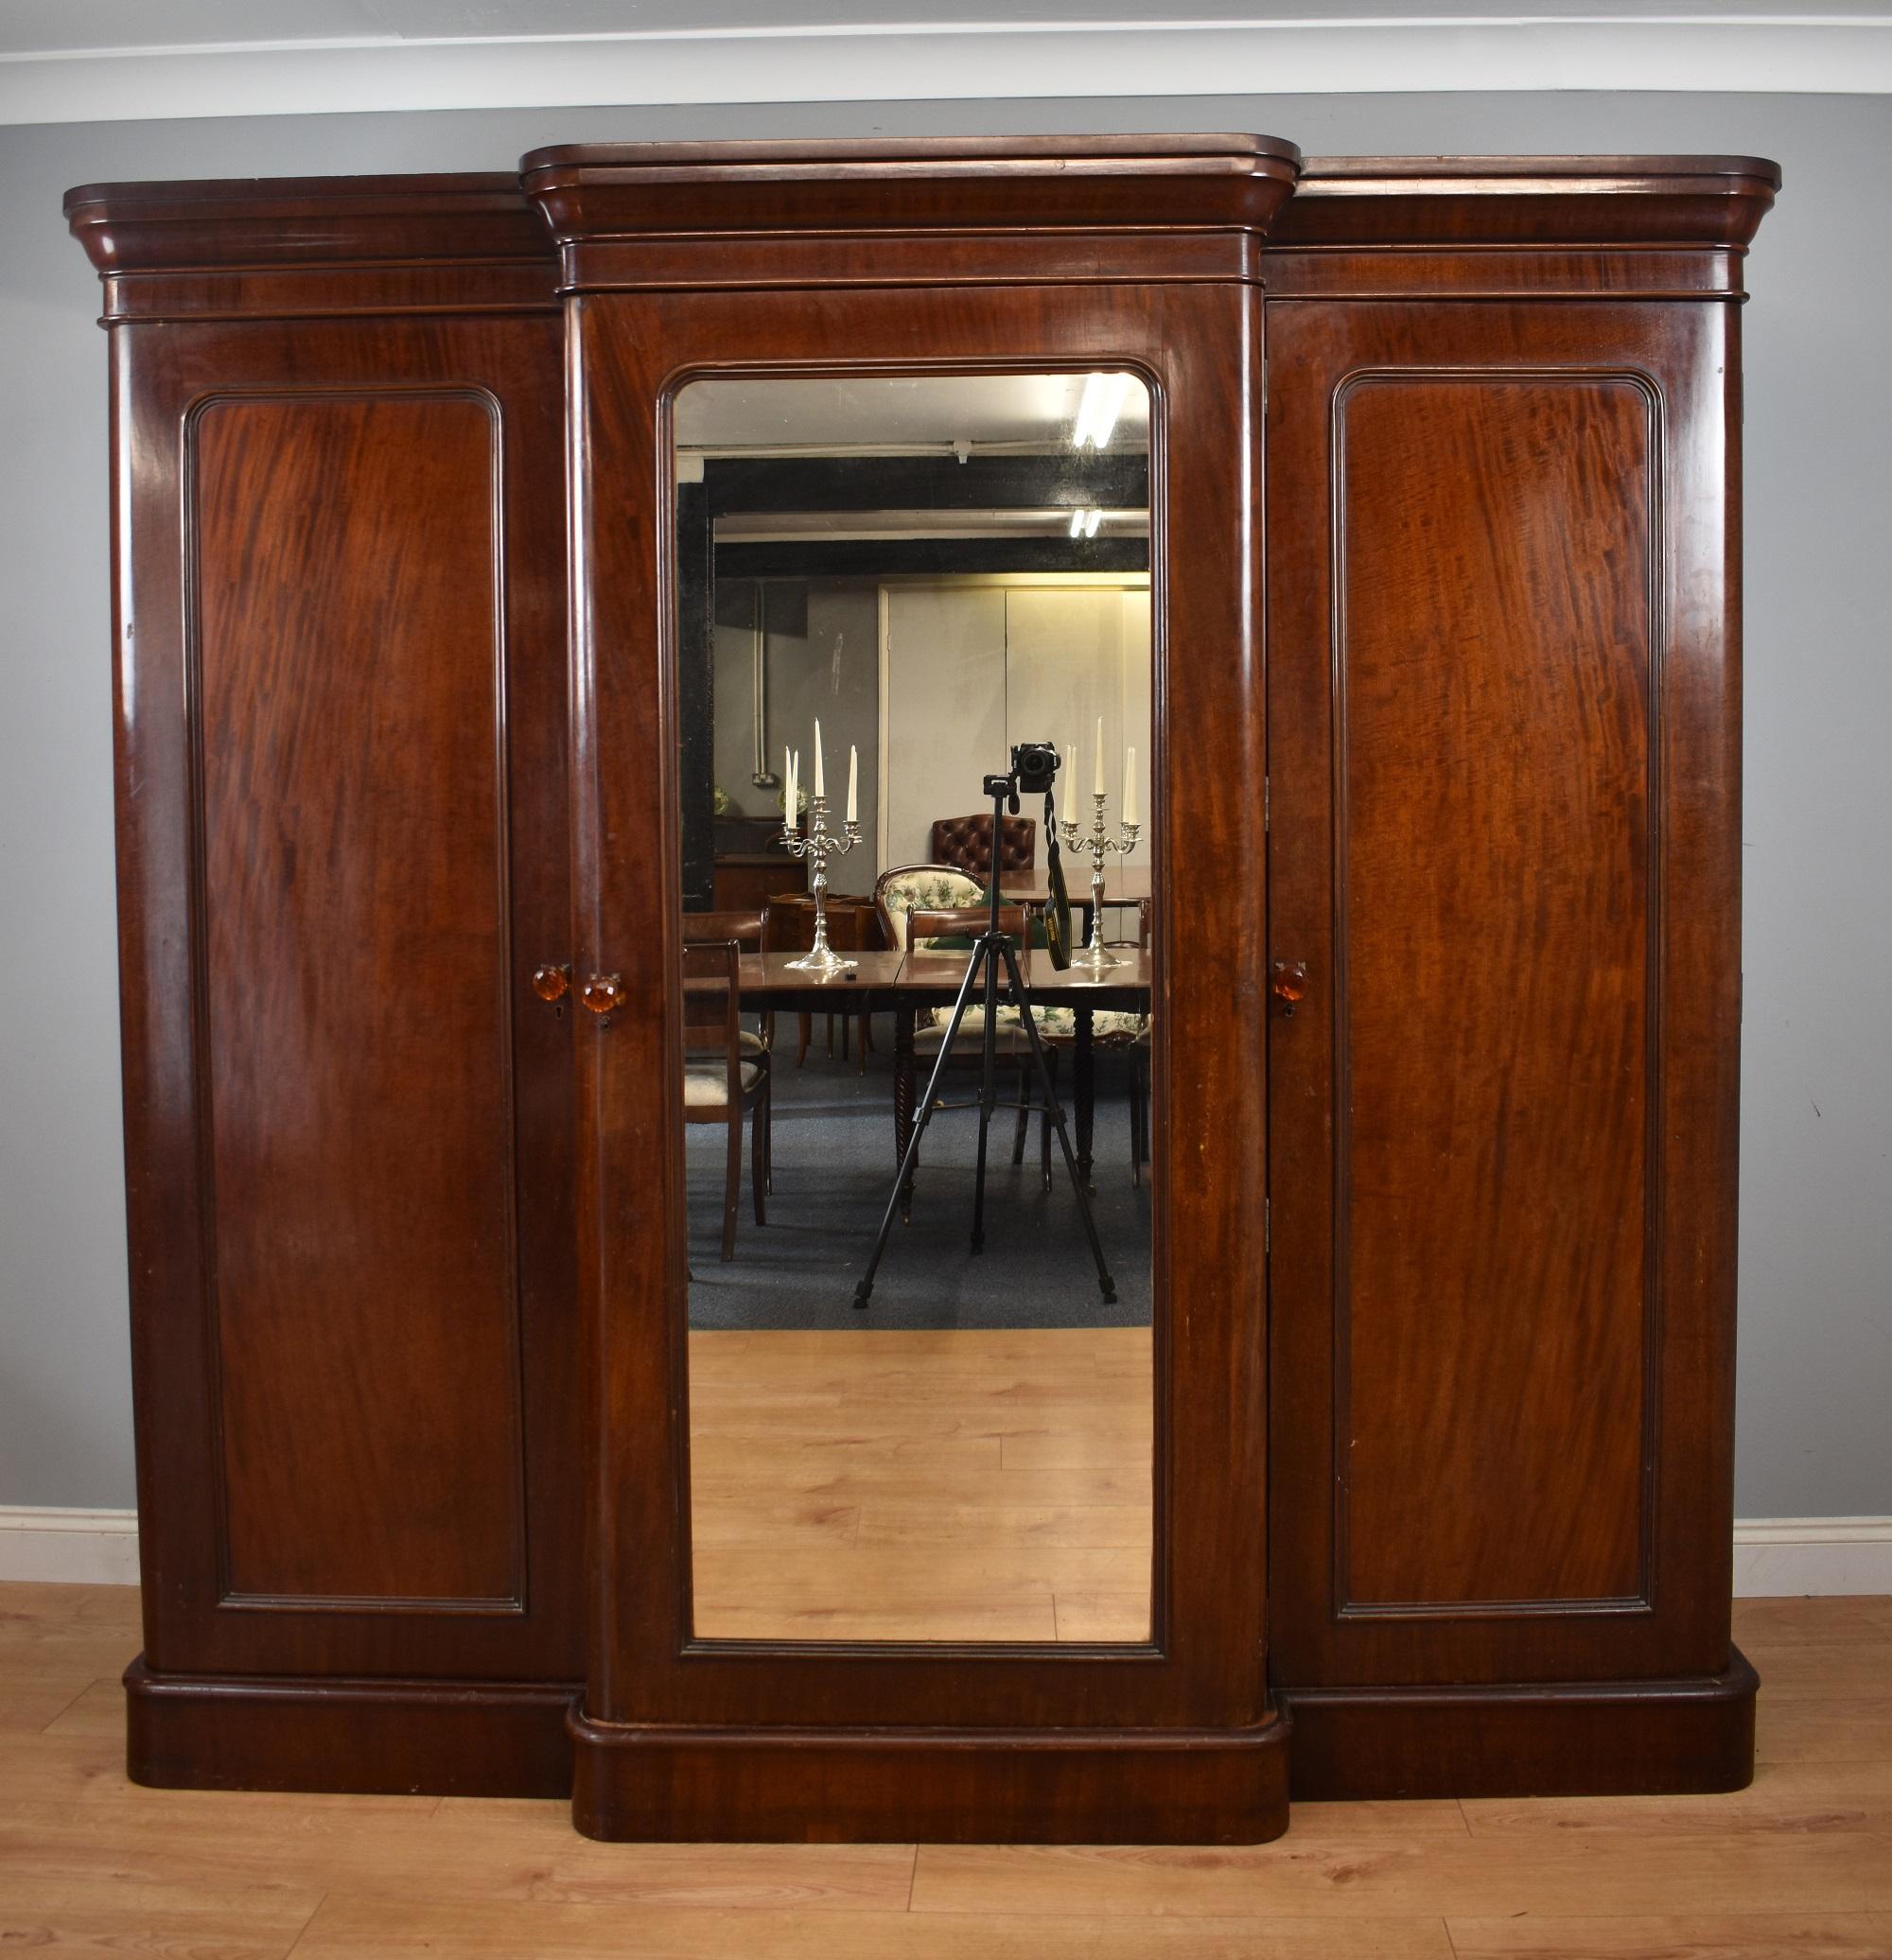 For sale is a good quality 19th century Victorian Mahogany Breakfront Triple Wardrobe, have a stepped and flared cornice, above three doors, the centre of which having a mirror, opening to reveal a fitted interior consisting of linen trays to the